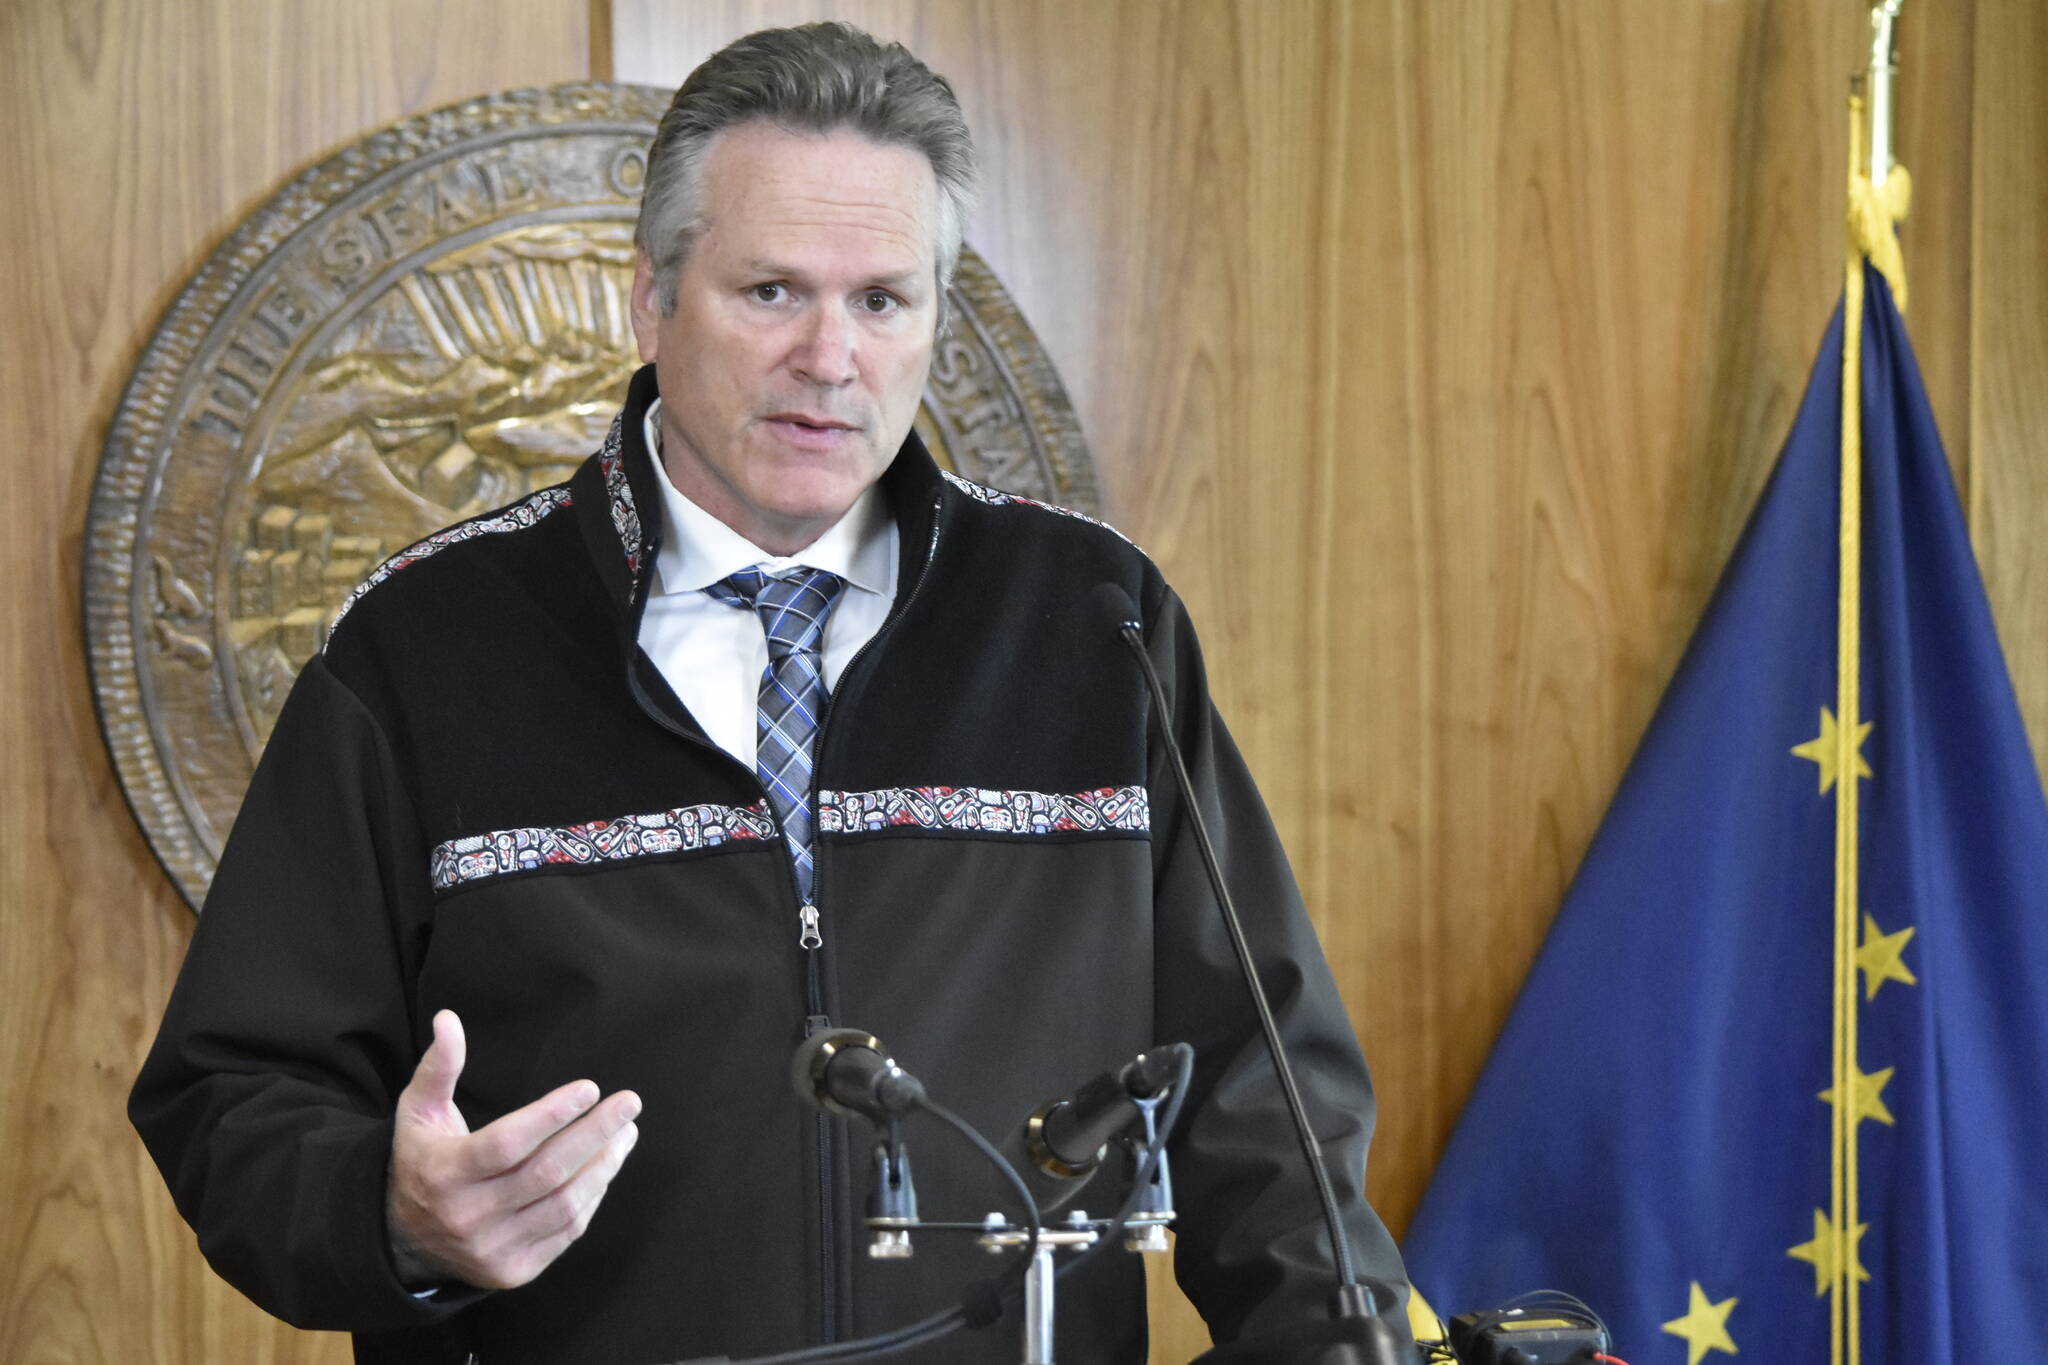 Gov. Mike Dunleavy, seen here at a Aug. 16, news conference, announced Thursday he was filing suit against the Biden administration for an Environmental Protection Agency decision to potentially protect Bristol Bay waters under the Clean Water Act. (Peter Segall / Juneau Empire file)